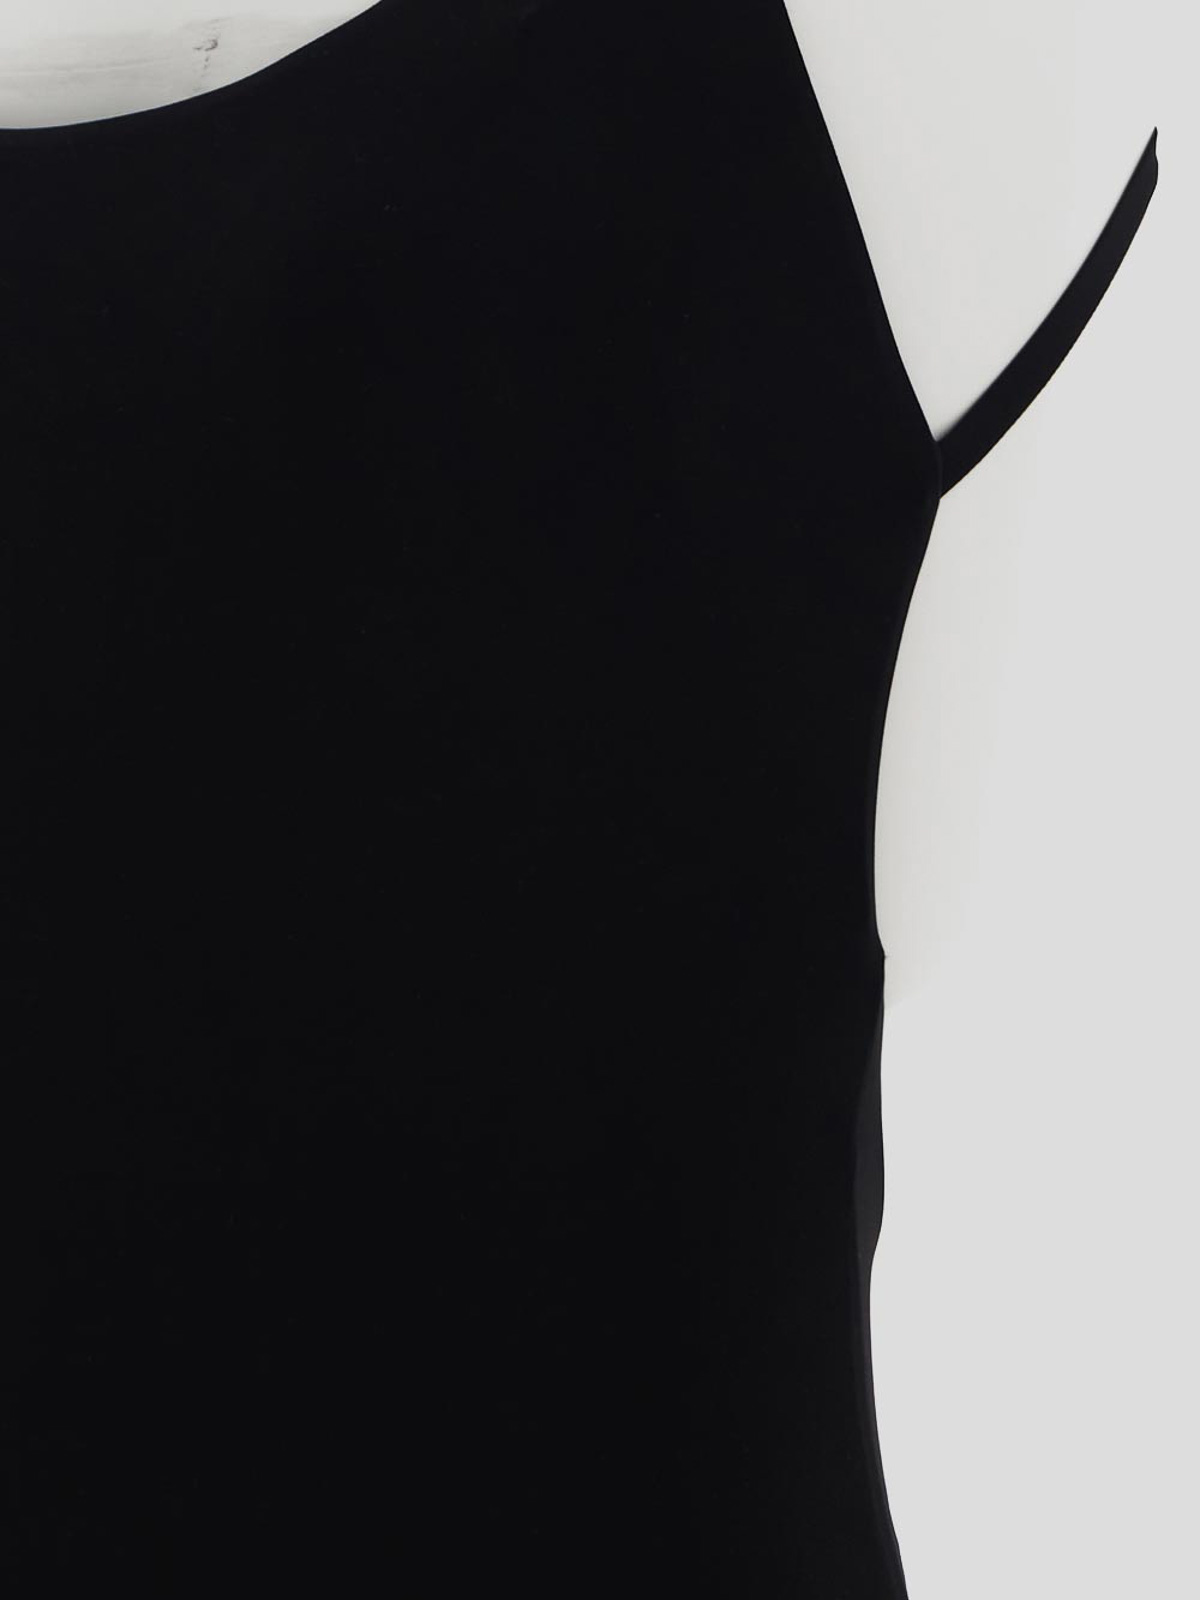 One-piece Lido - Black one-piece - UNOBLACK | Shop online at THEBS [iKRIX]